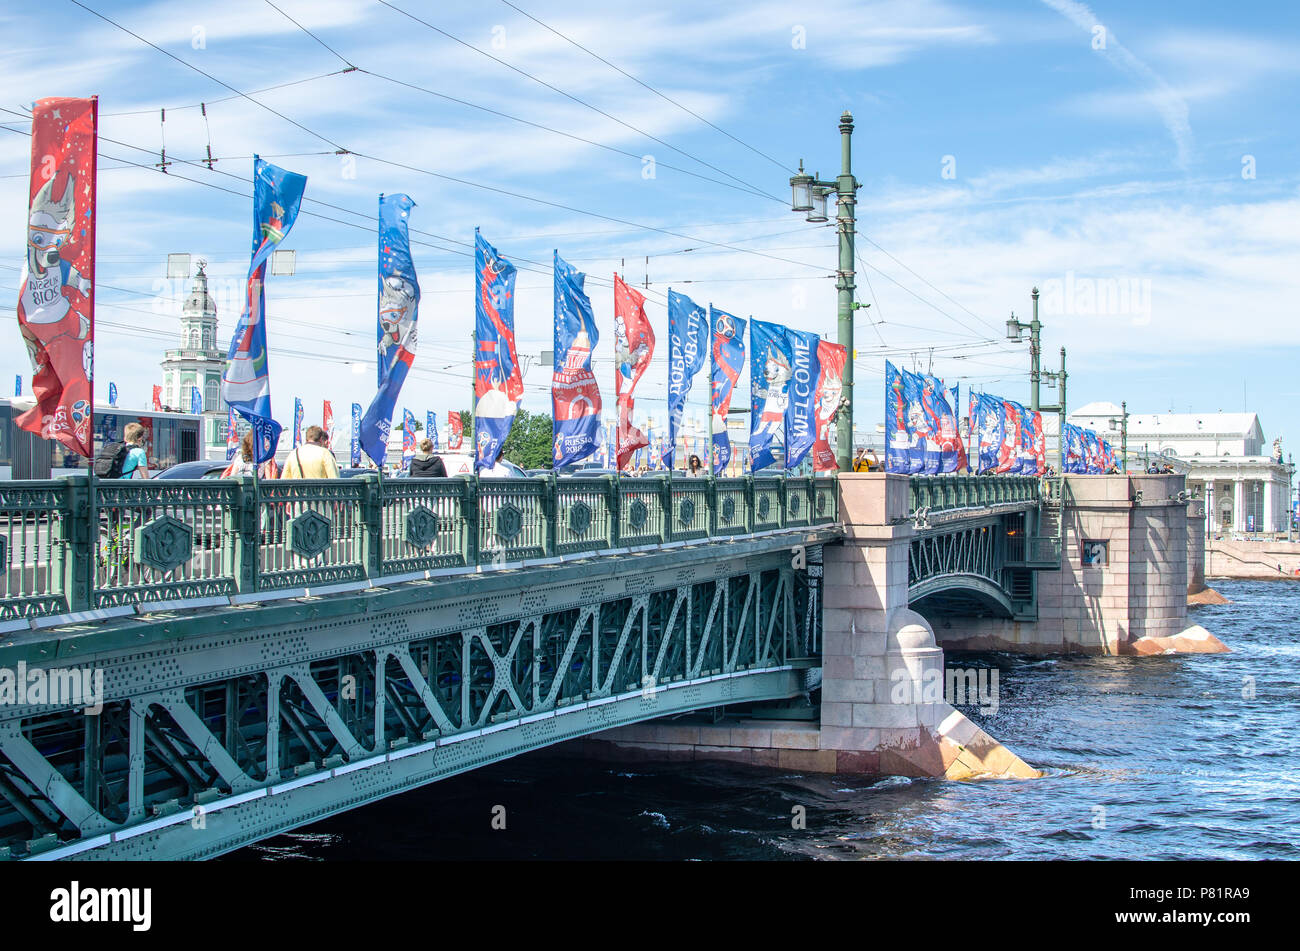 Official FIFA World Cup 2018 flags on the Palace Bridge over the Neva river in St Petersburg, Russia Stock Photo